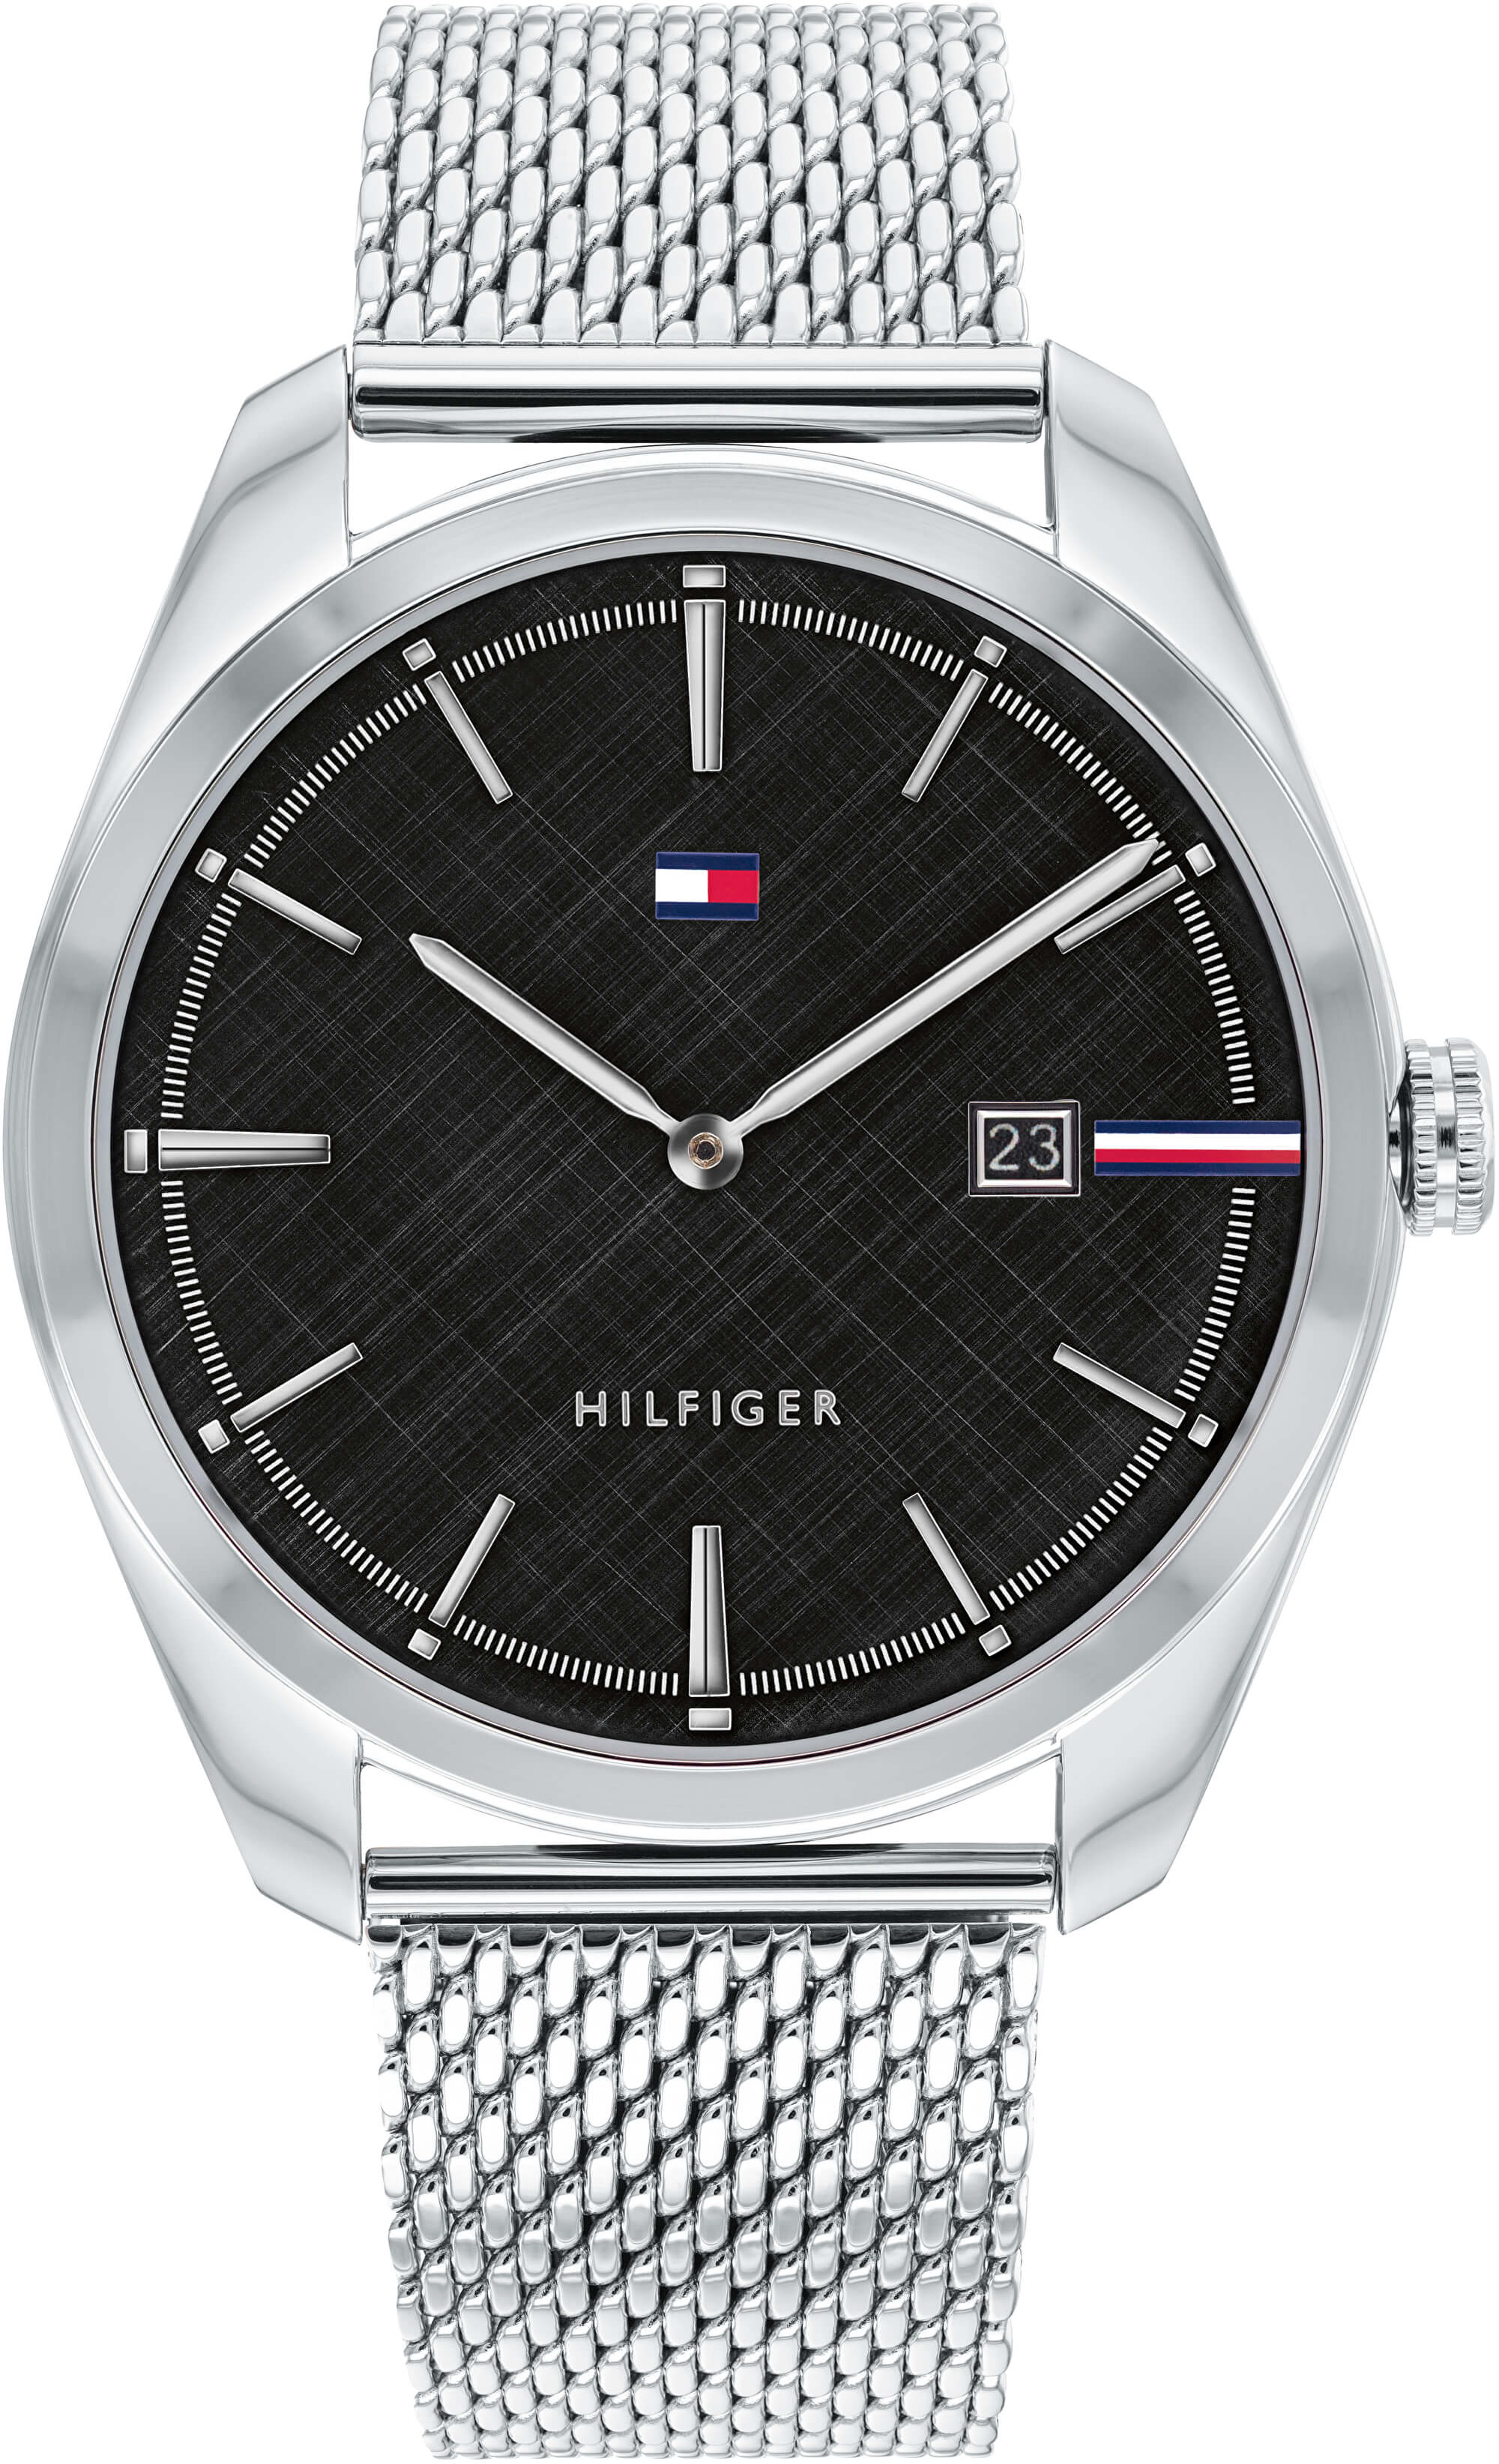 Tommy Hilfiger Theo 1710425